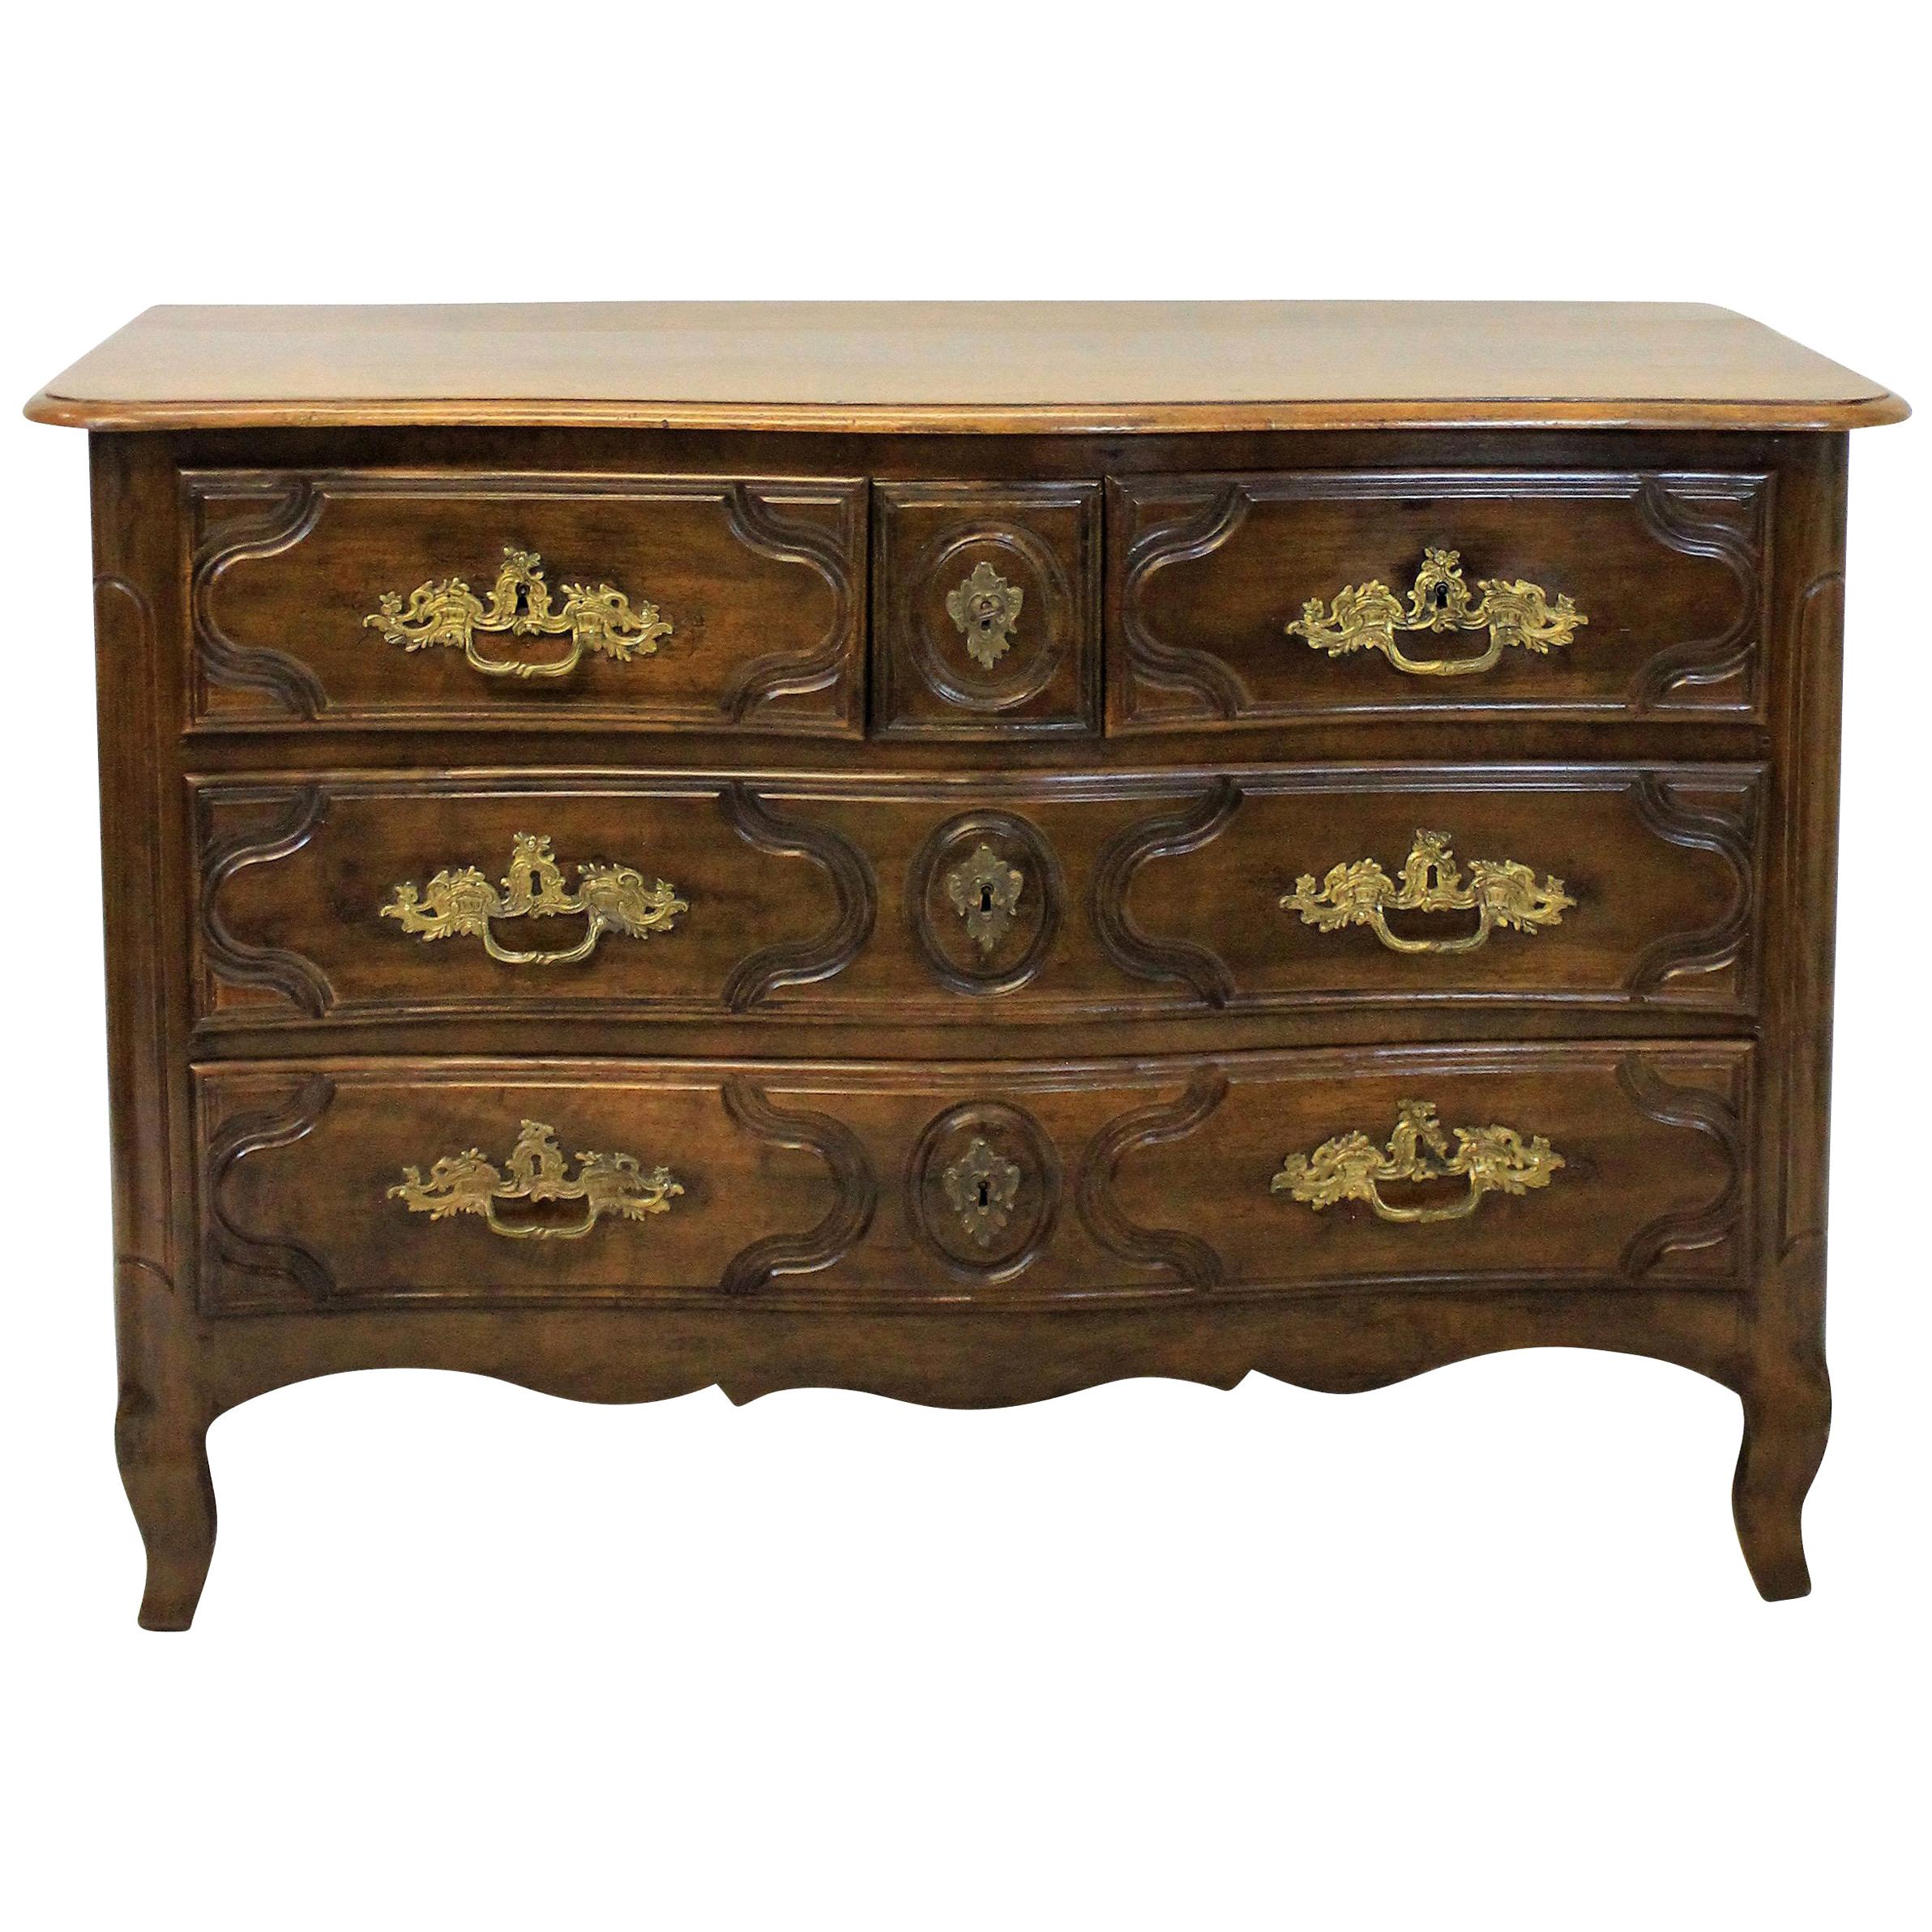 French Louis XV Walnut and Gilt Bronze Mounted Commode